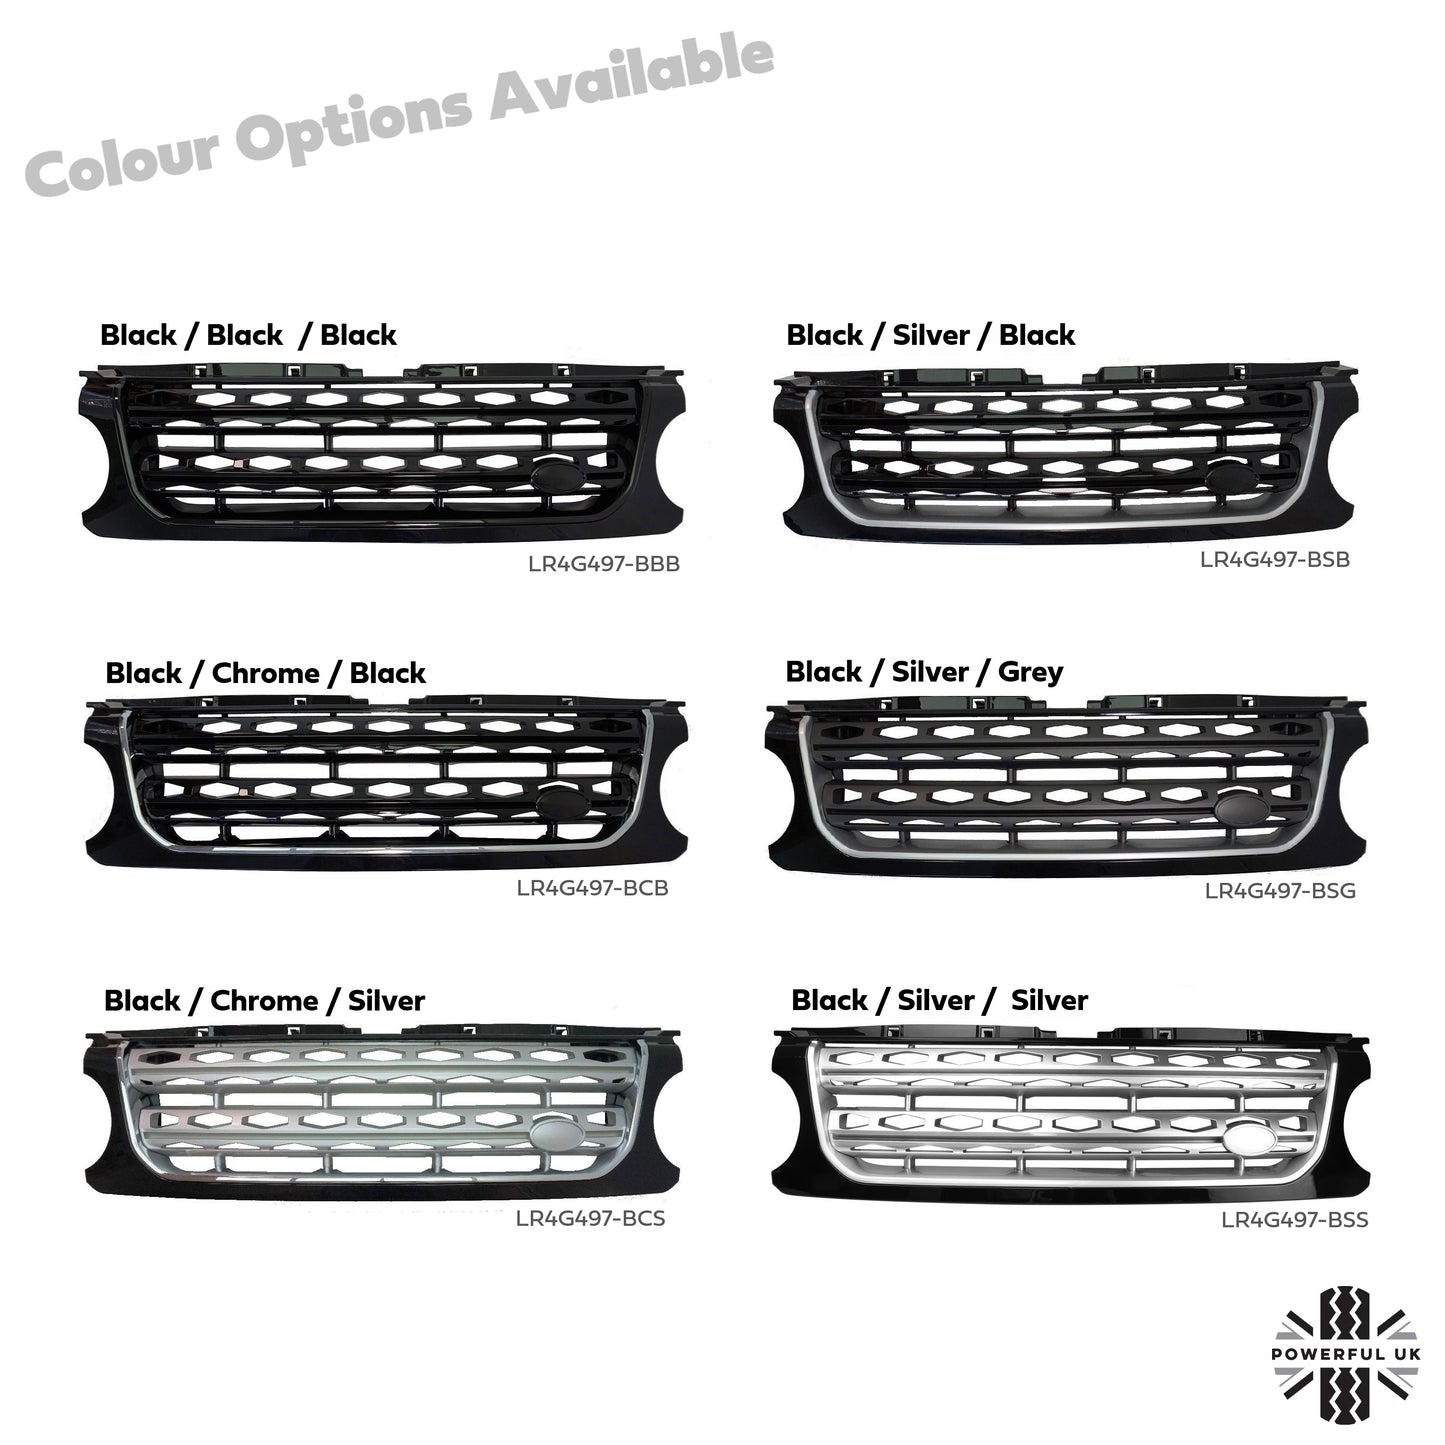 Front Grille "facelift look" - Black / Chrome / Black - for early Land Rover Discovery 4